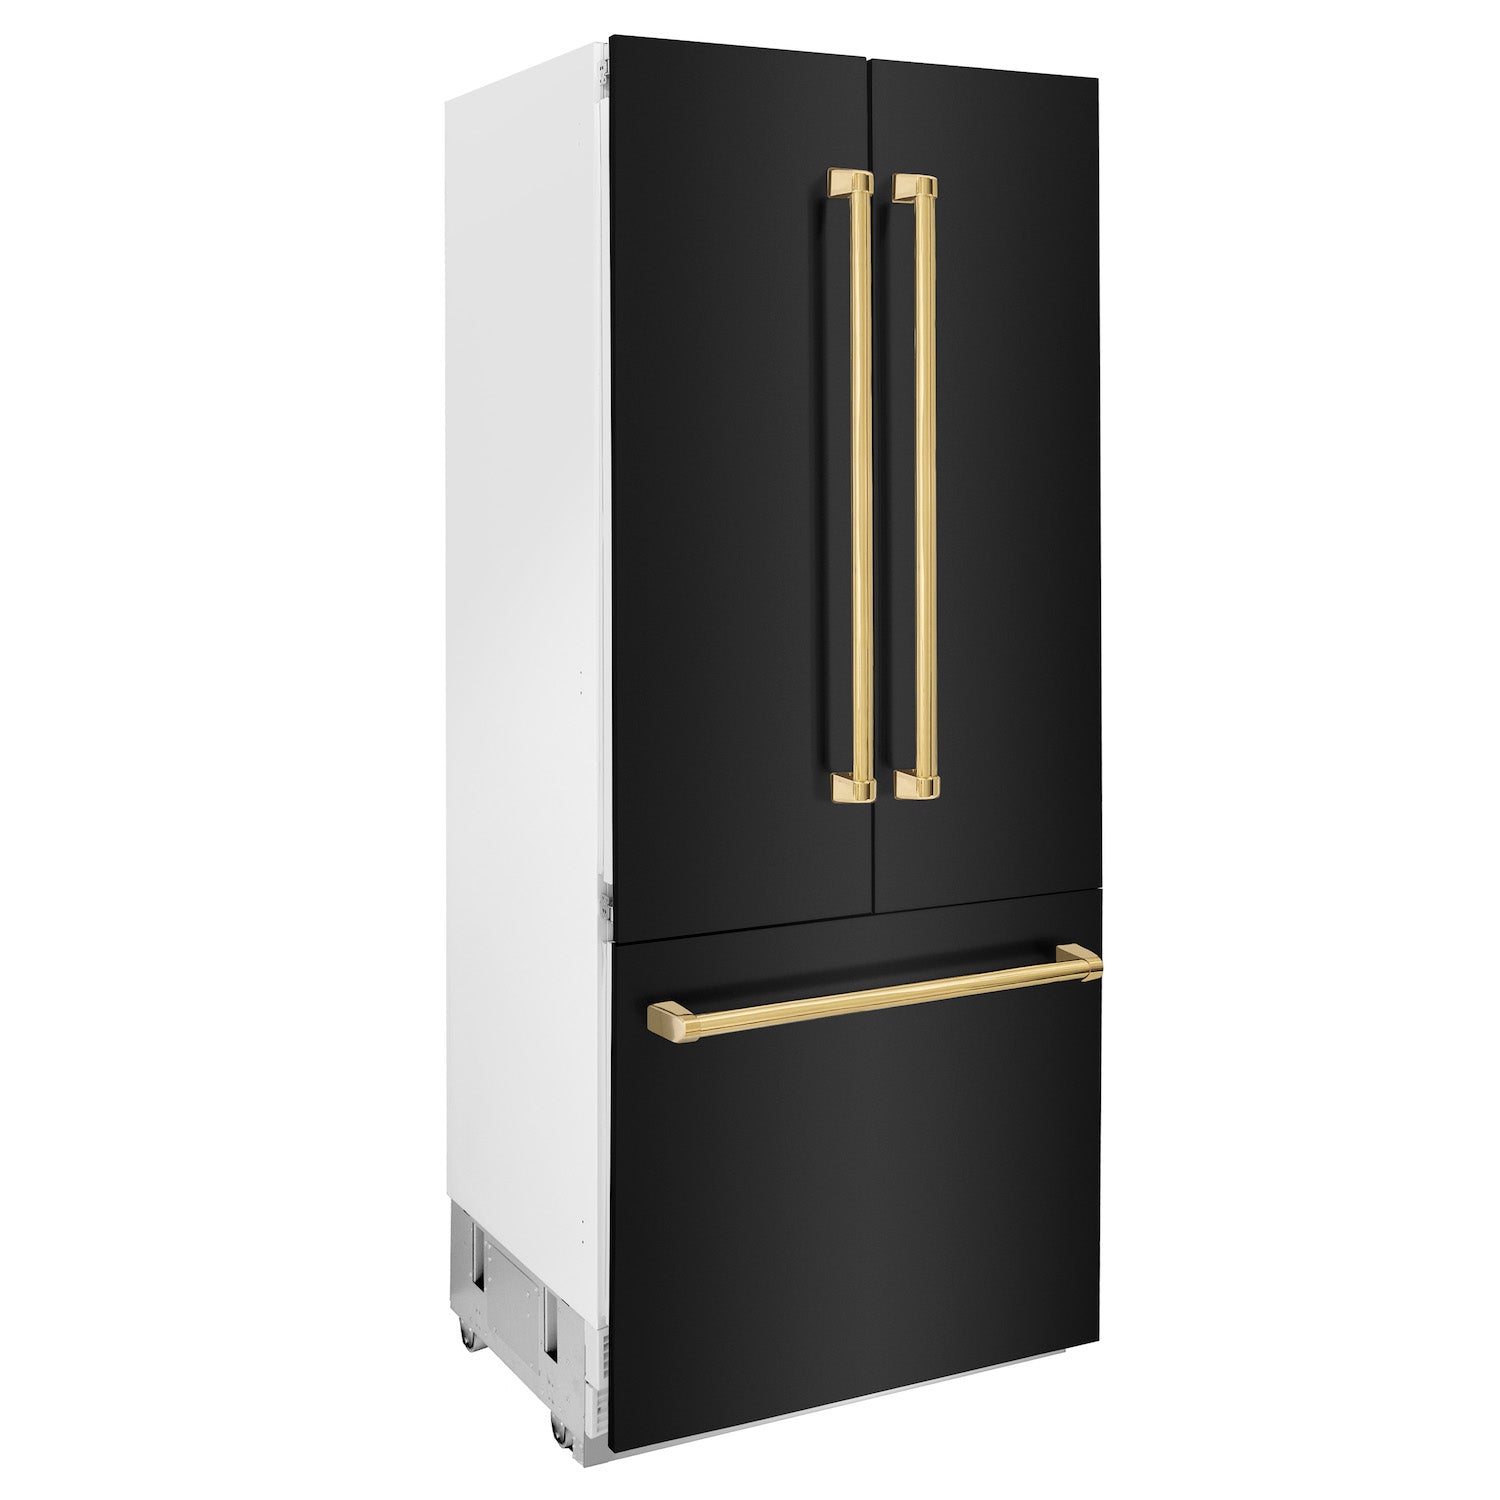 ZLINE Autograph Edition 36 in. 19.6 cu. ft. Built-in 2-Door Bottom Freezer Refrigerator with Internal Water and Ice Dispenser in Black Stainless Steel with Polished Gold Accents (RBIVZ-BS-36-G) side, doors closed.